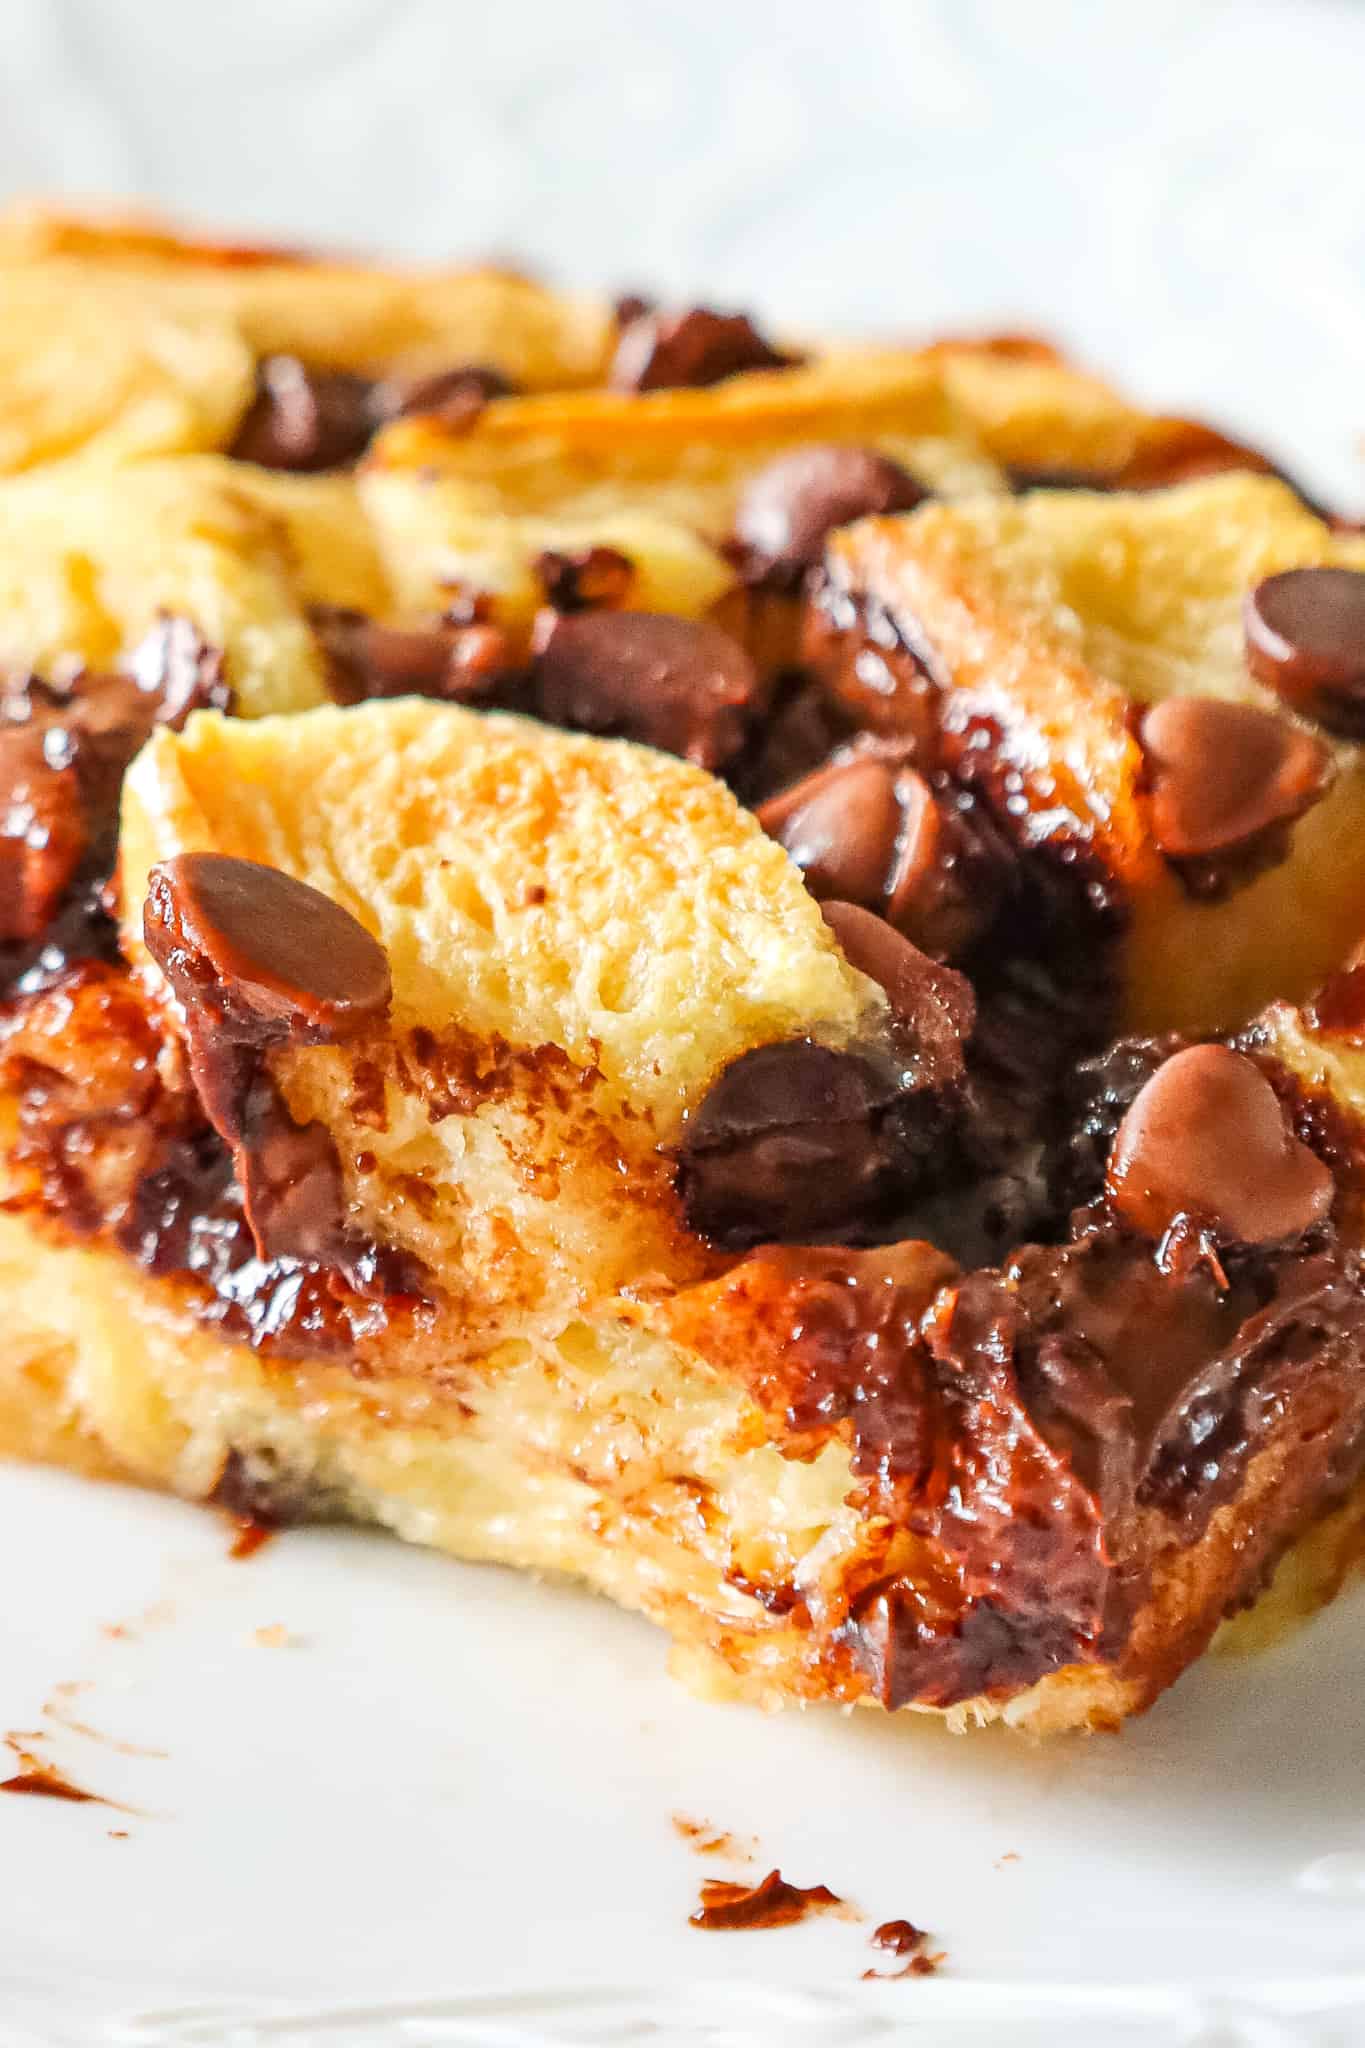 Chocolate Chip Bread Pudding is an easy dessert recipe using brioche bread and loaded with semi sweet and milk chocolate chips.